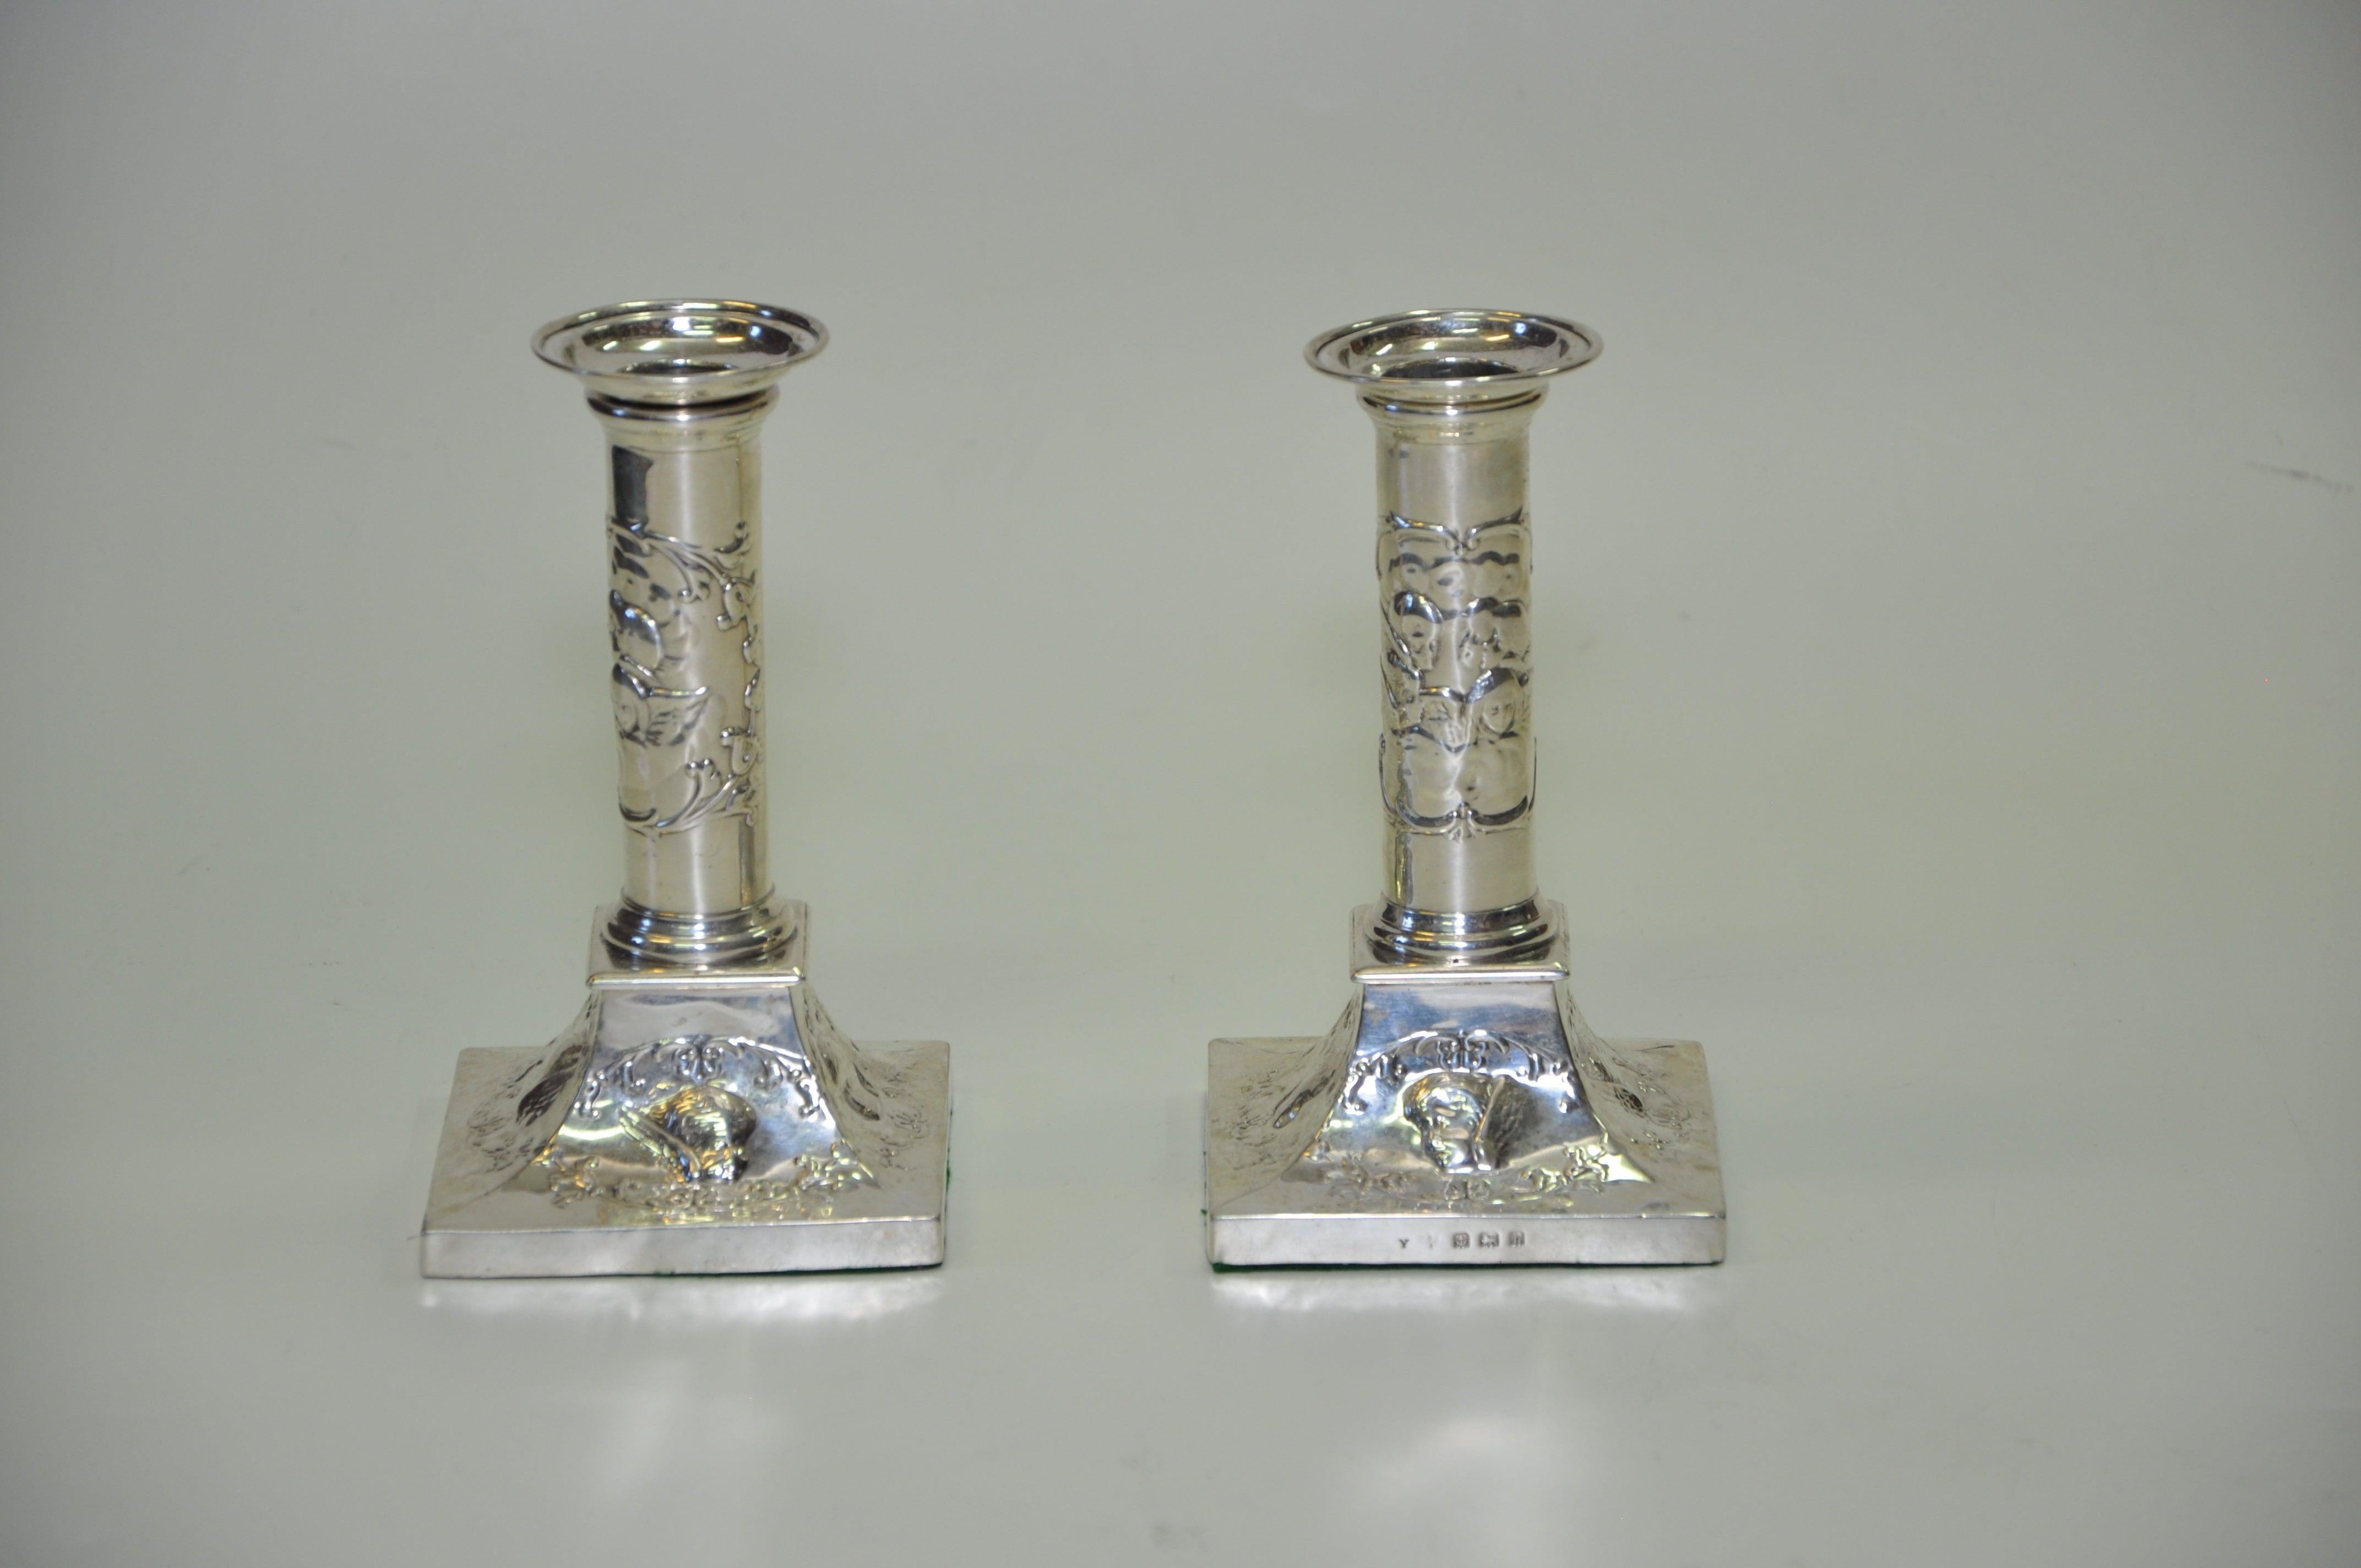 Pair of antique silver angel cherub candlesticks, beautiful matching pair of exquisite antique solid silver candlesticks. They are absolutely gorgeous adorning adorable decorative angels and cherubs on the base and then stem, featuring cute baby